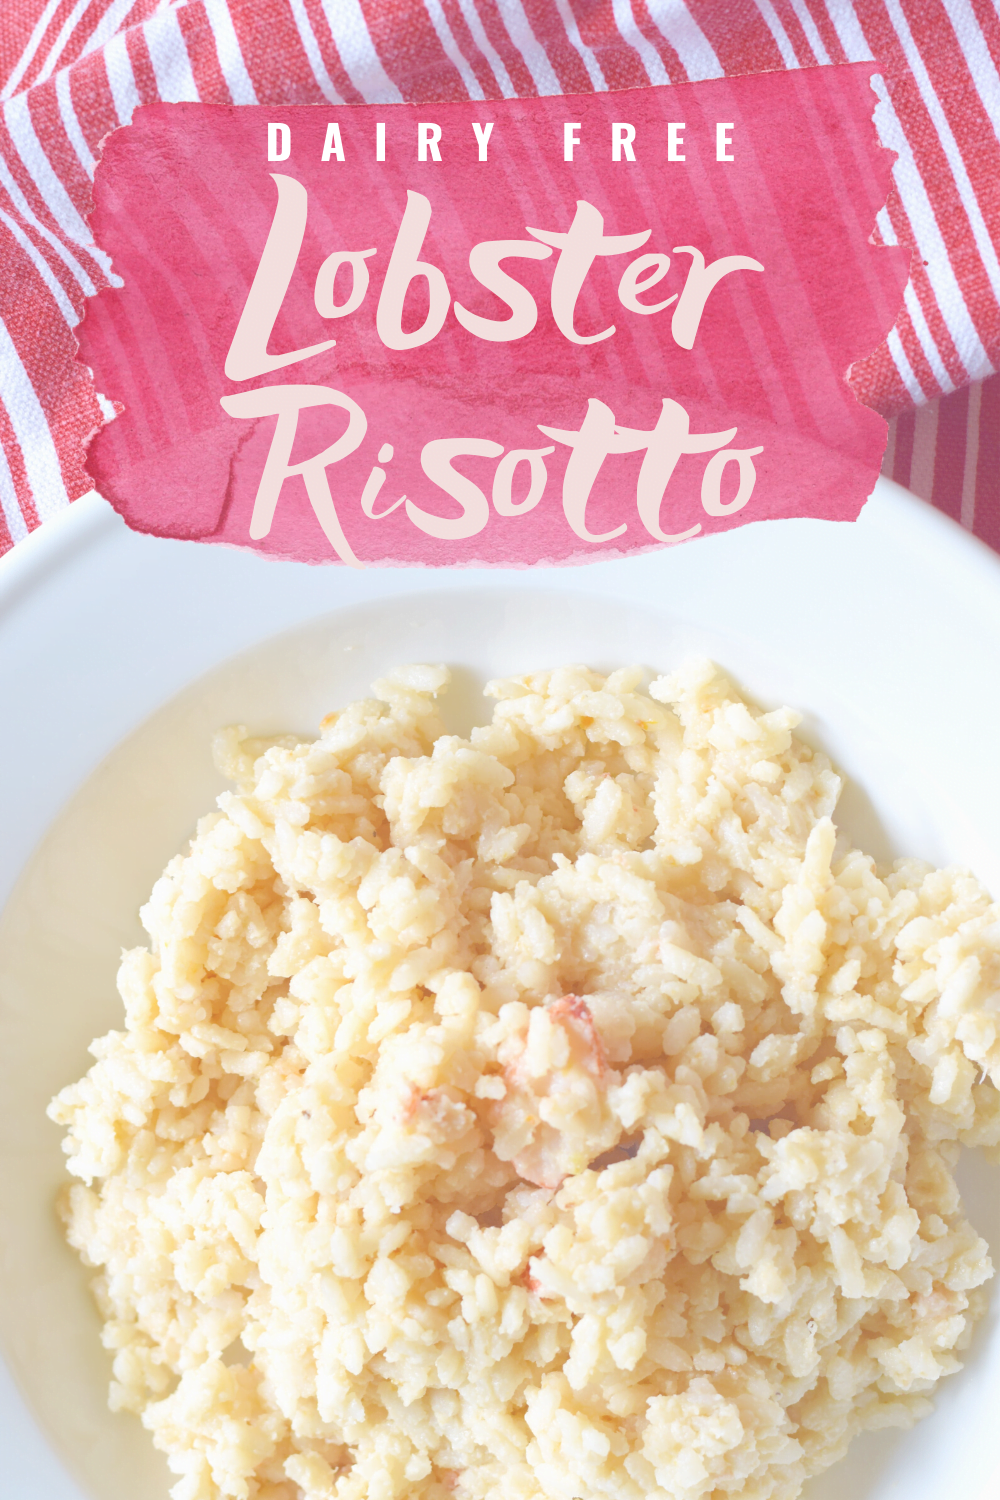 Dairy Free Lobster Risotto - A delicious and easy dinner idea featuring chunks of rich lobster paired with savory gluten and dairy free risotto! | Dairy Free Lobster Risotto - Seafood Risotto Recipe - Easy Risotto Recipe - Gluten Free Risotto - Dairy Free Dinner Idea - Lobster Risotto Recipe - Easy Risotto Ingredients - Seafood Dinner Recipe